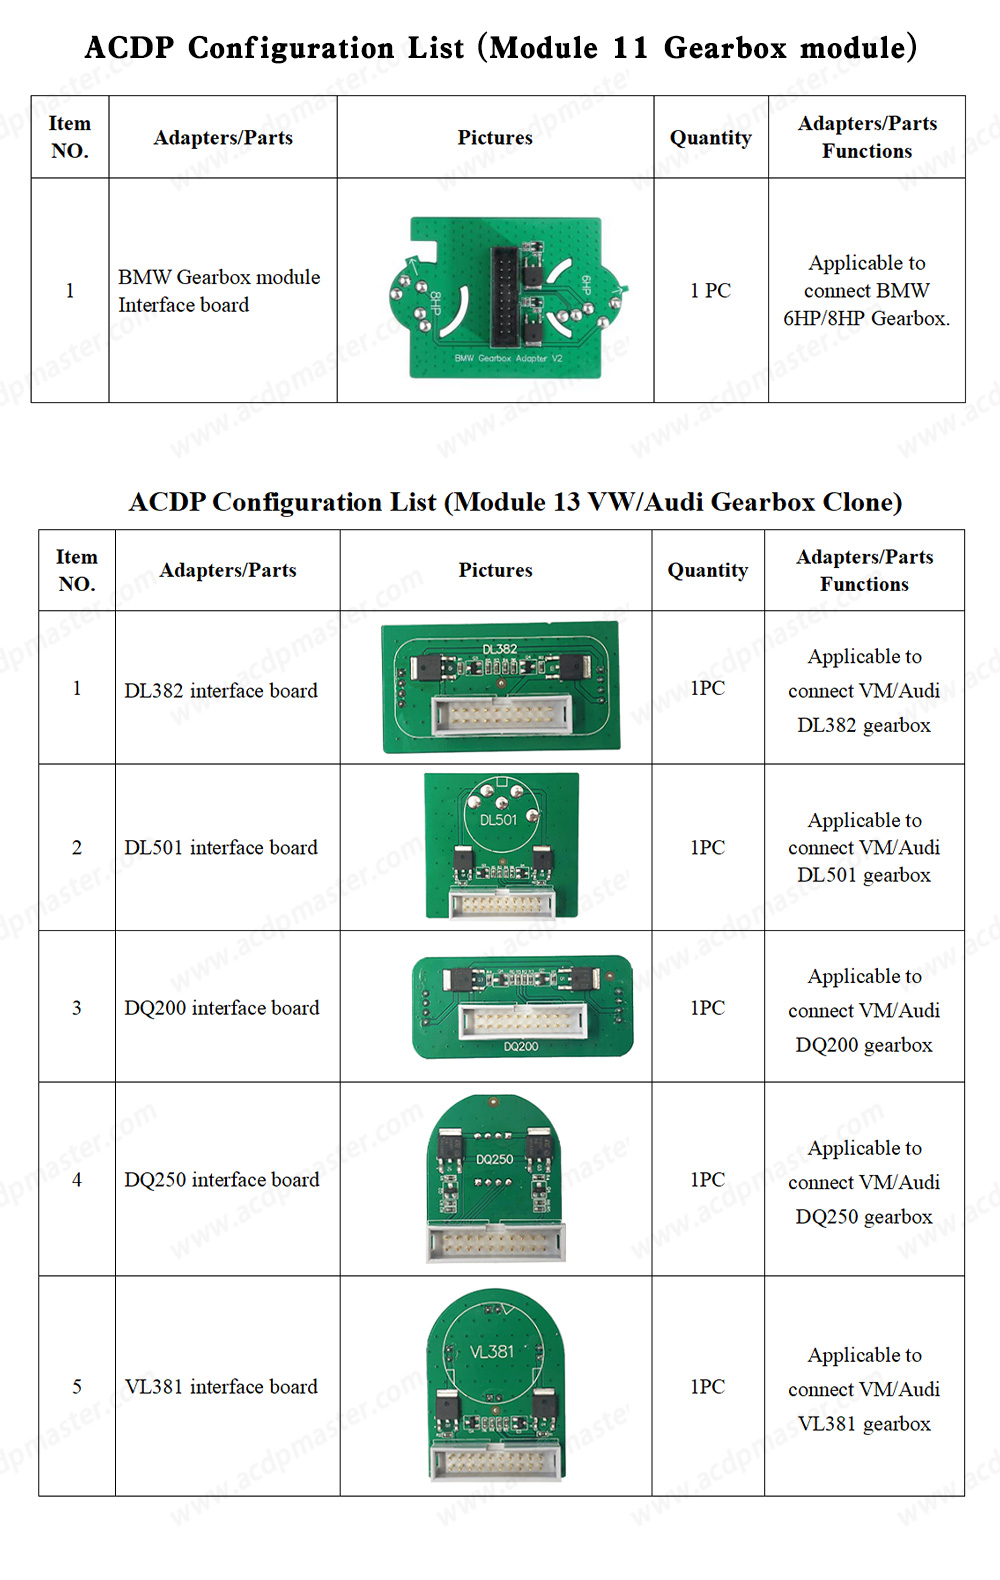 ACDP2 Gearbox Clone Package List 2